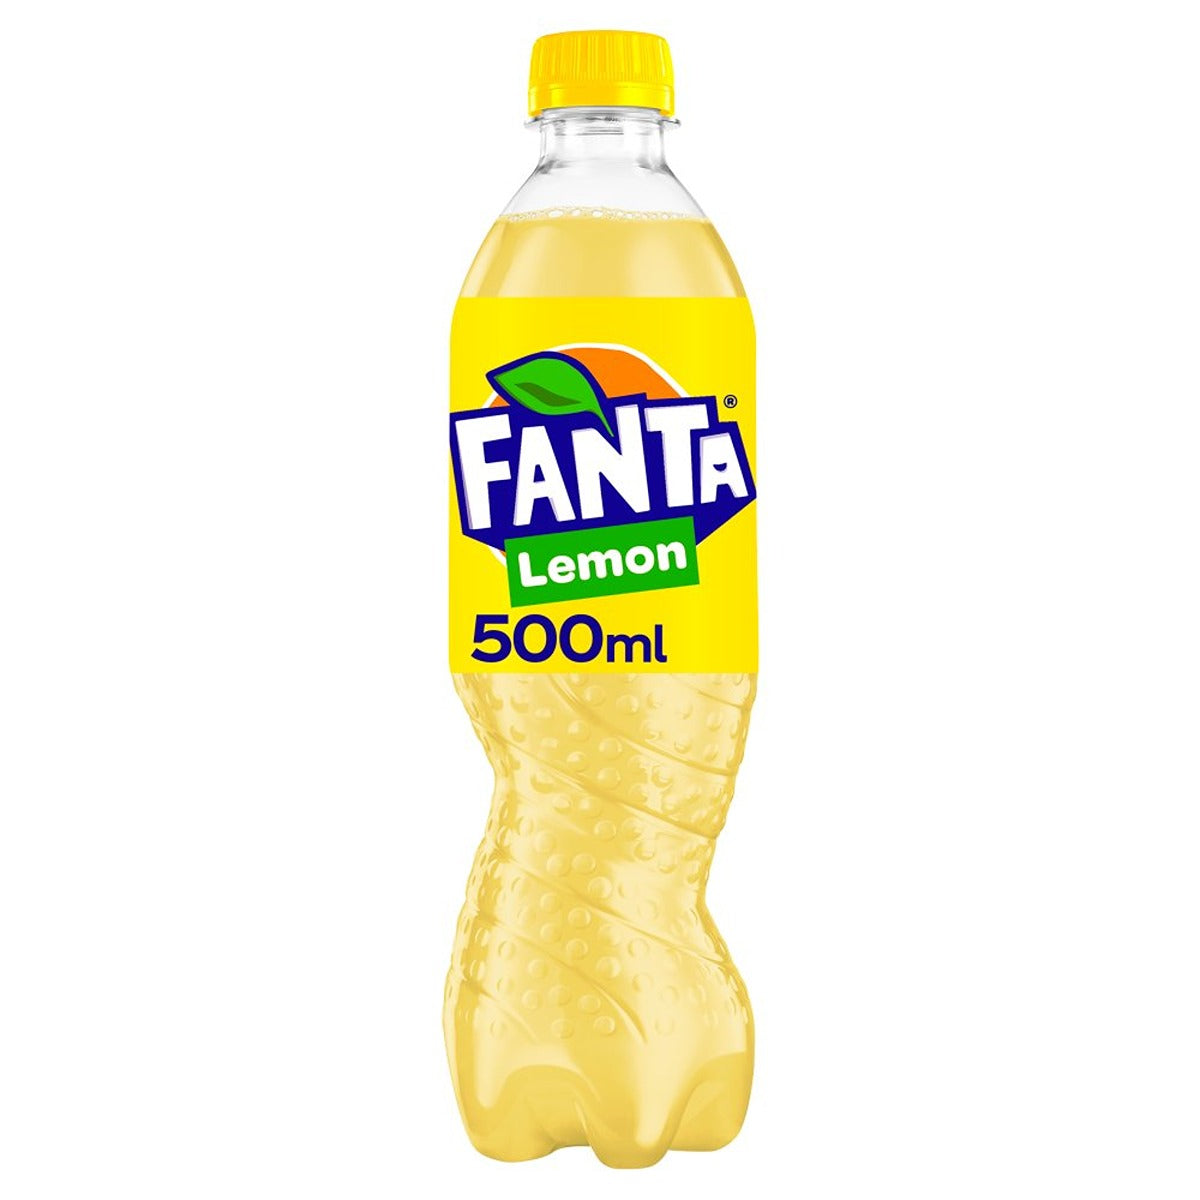 A Fanta - Lemon Bottle - 500ml with a yellow cap and a lemon graphic on the label.